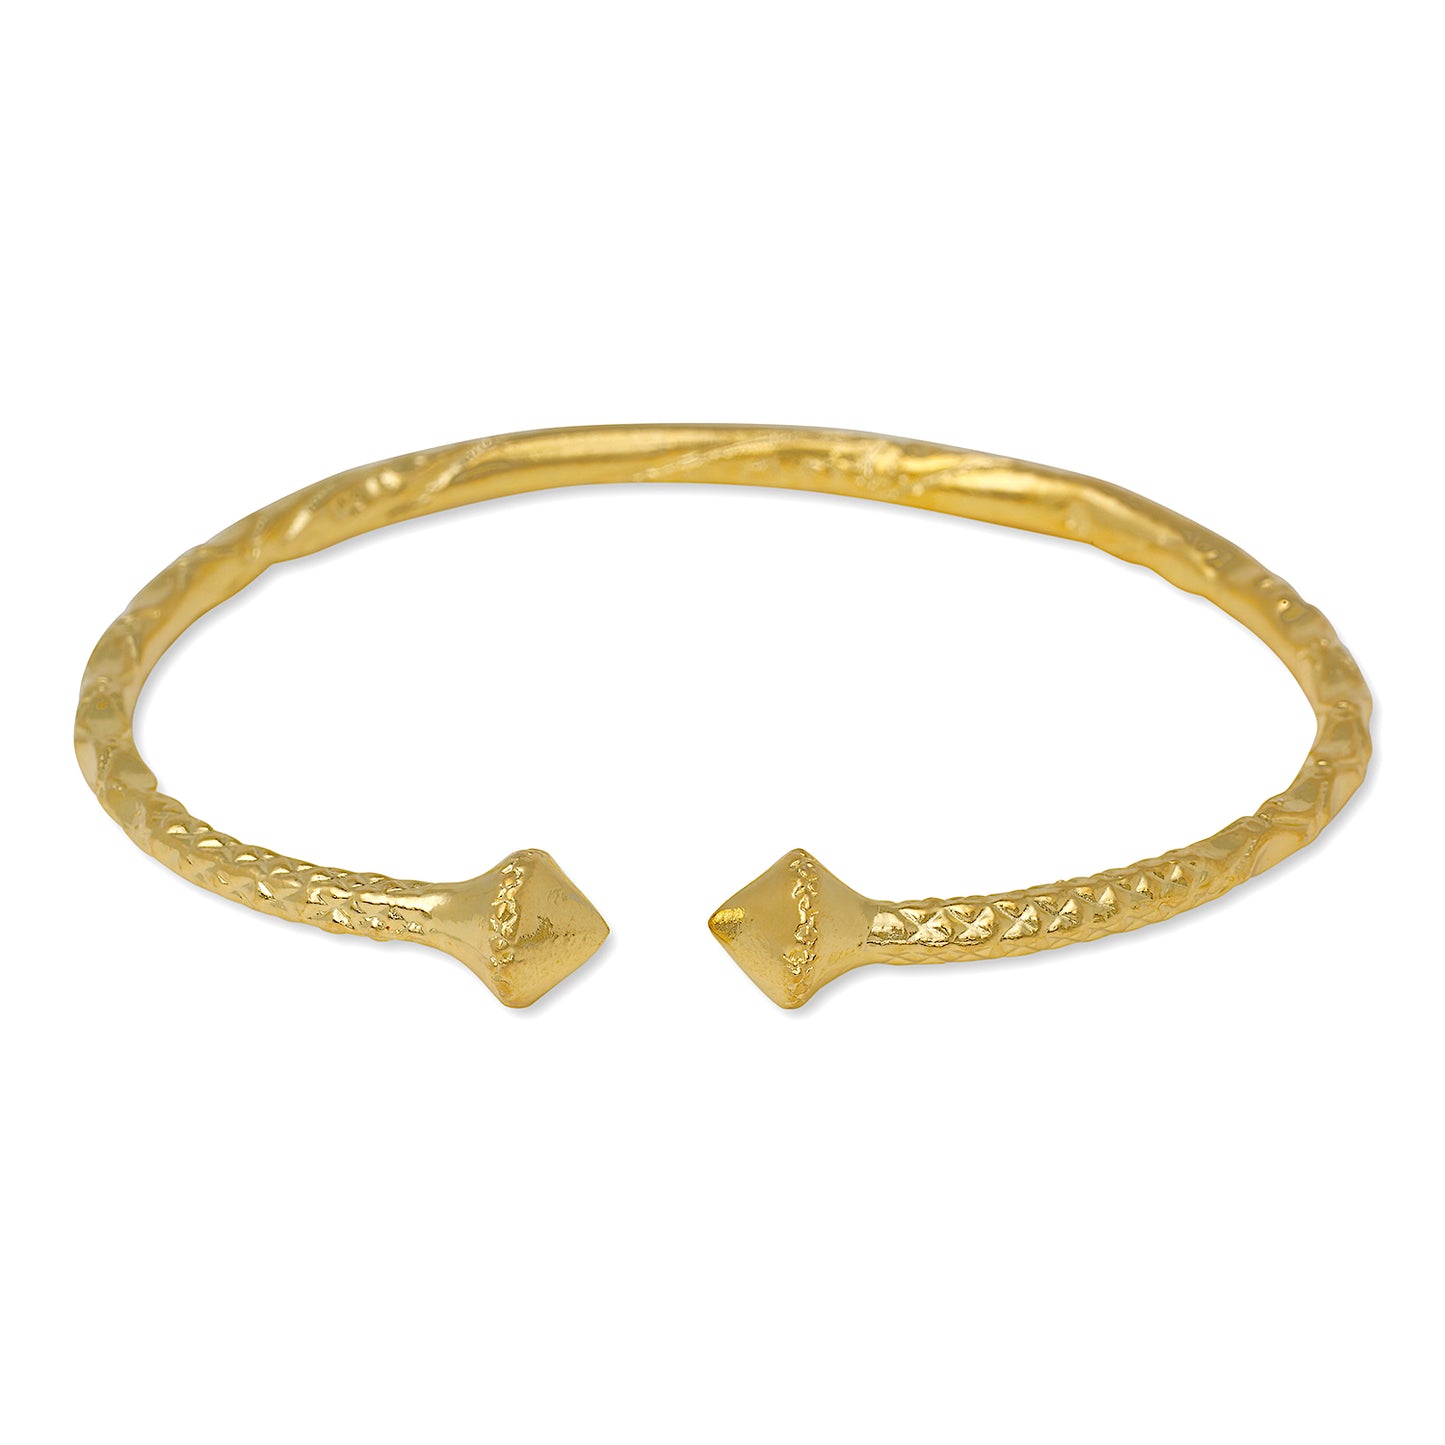 Better Jewelry Smooth Pyramid 14K Gold Plated .925 Sterling Silver Bangle, 1 piece